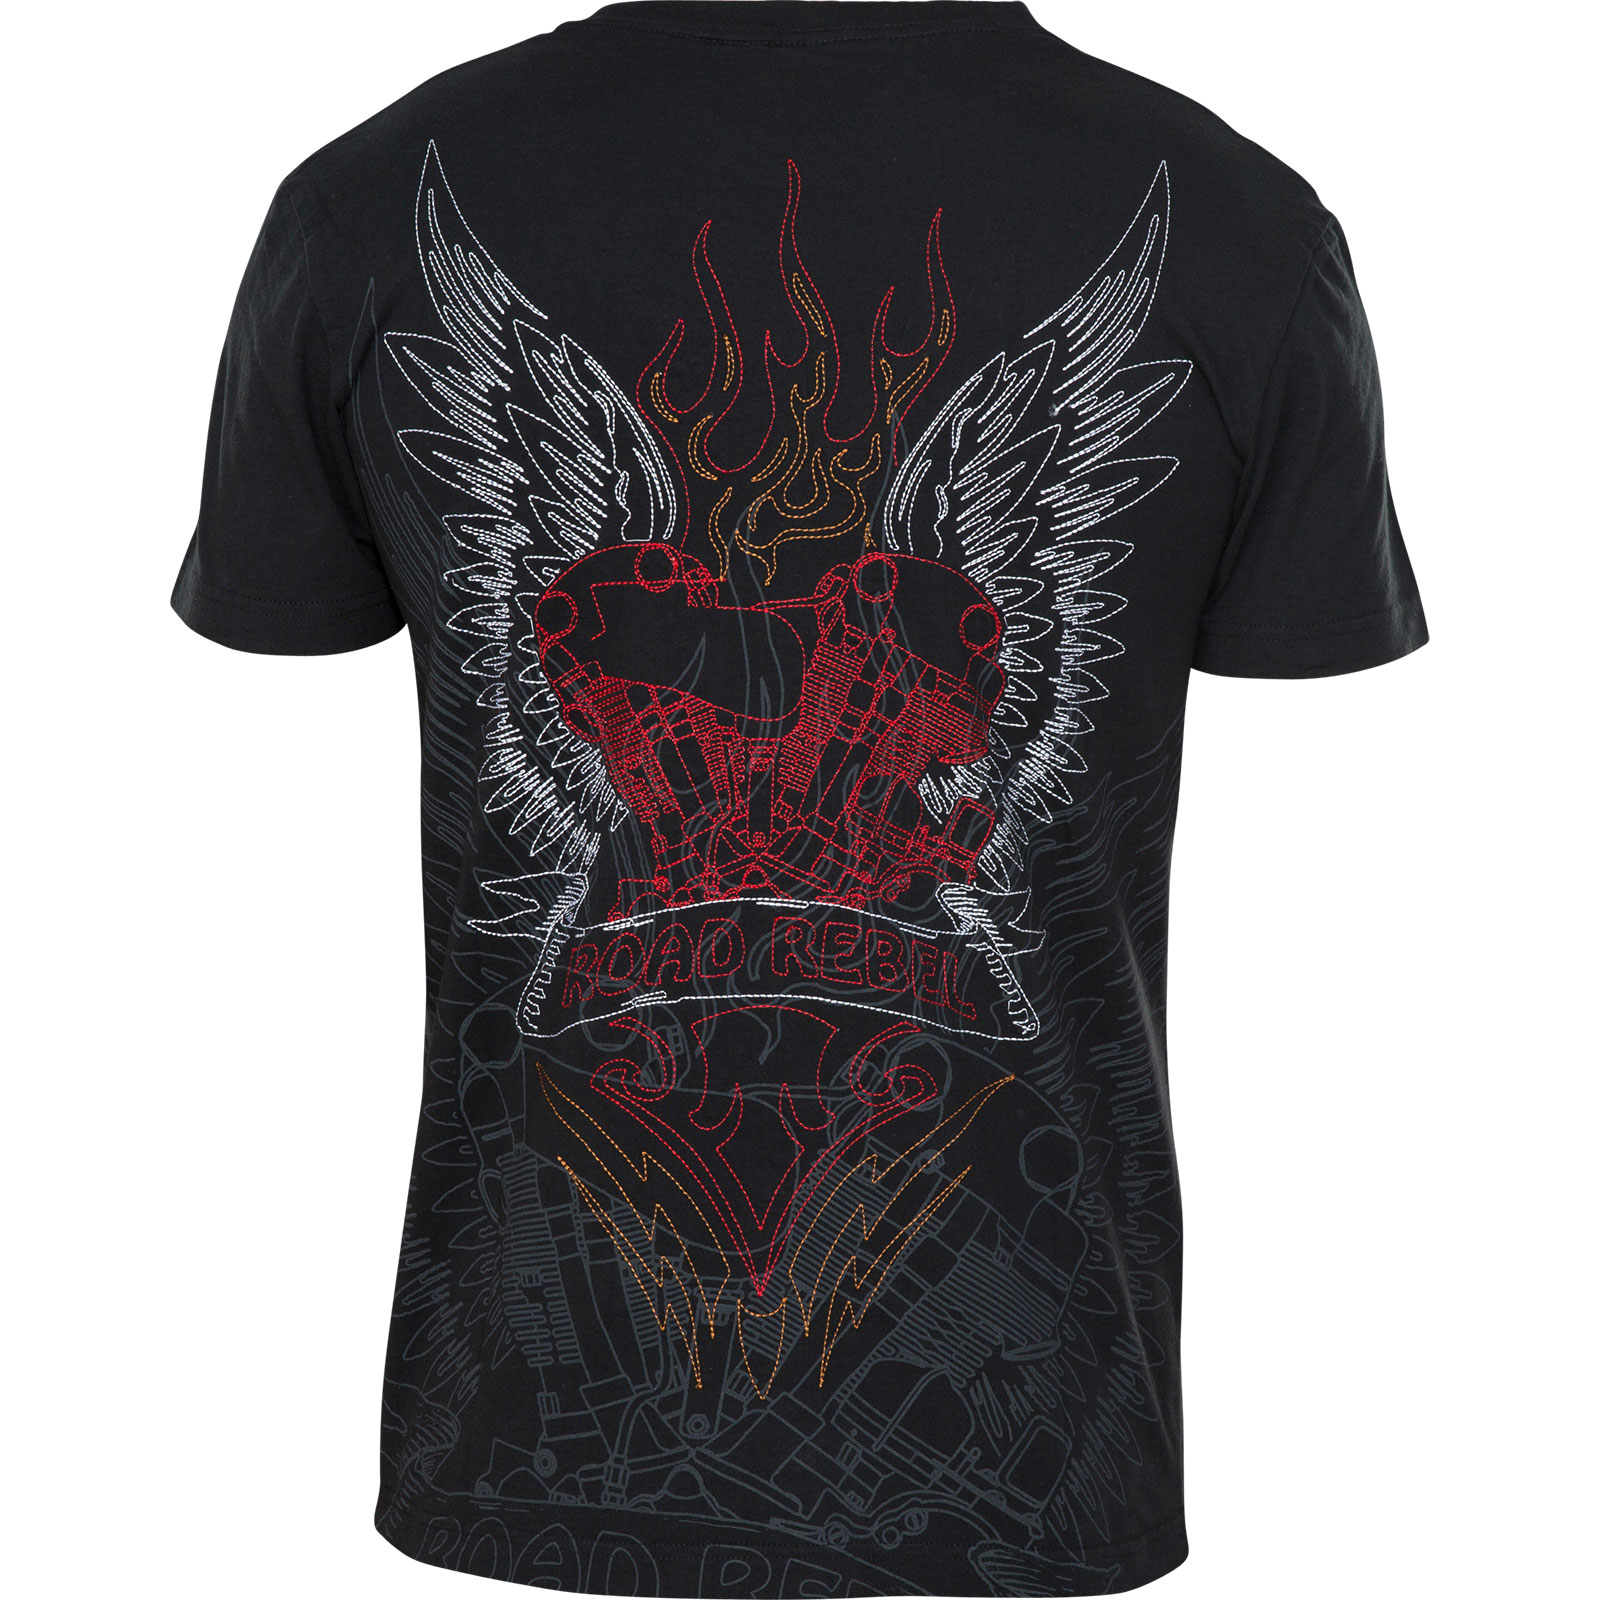 Rebel Spirit T-Shirt SSK151761 with large embroidering featuring wings ...